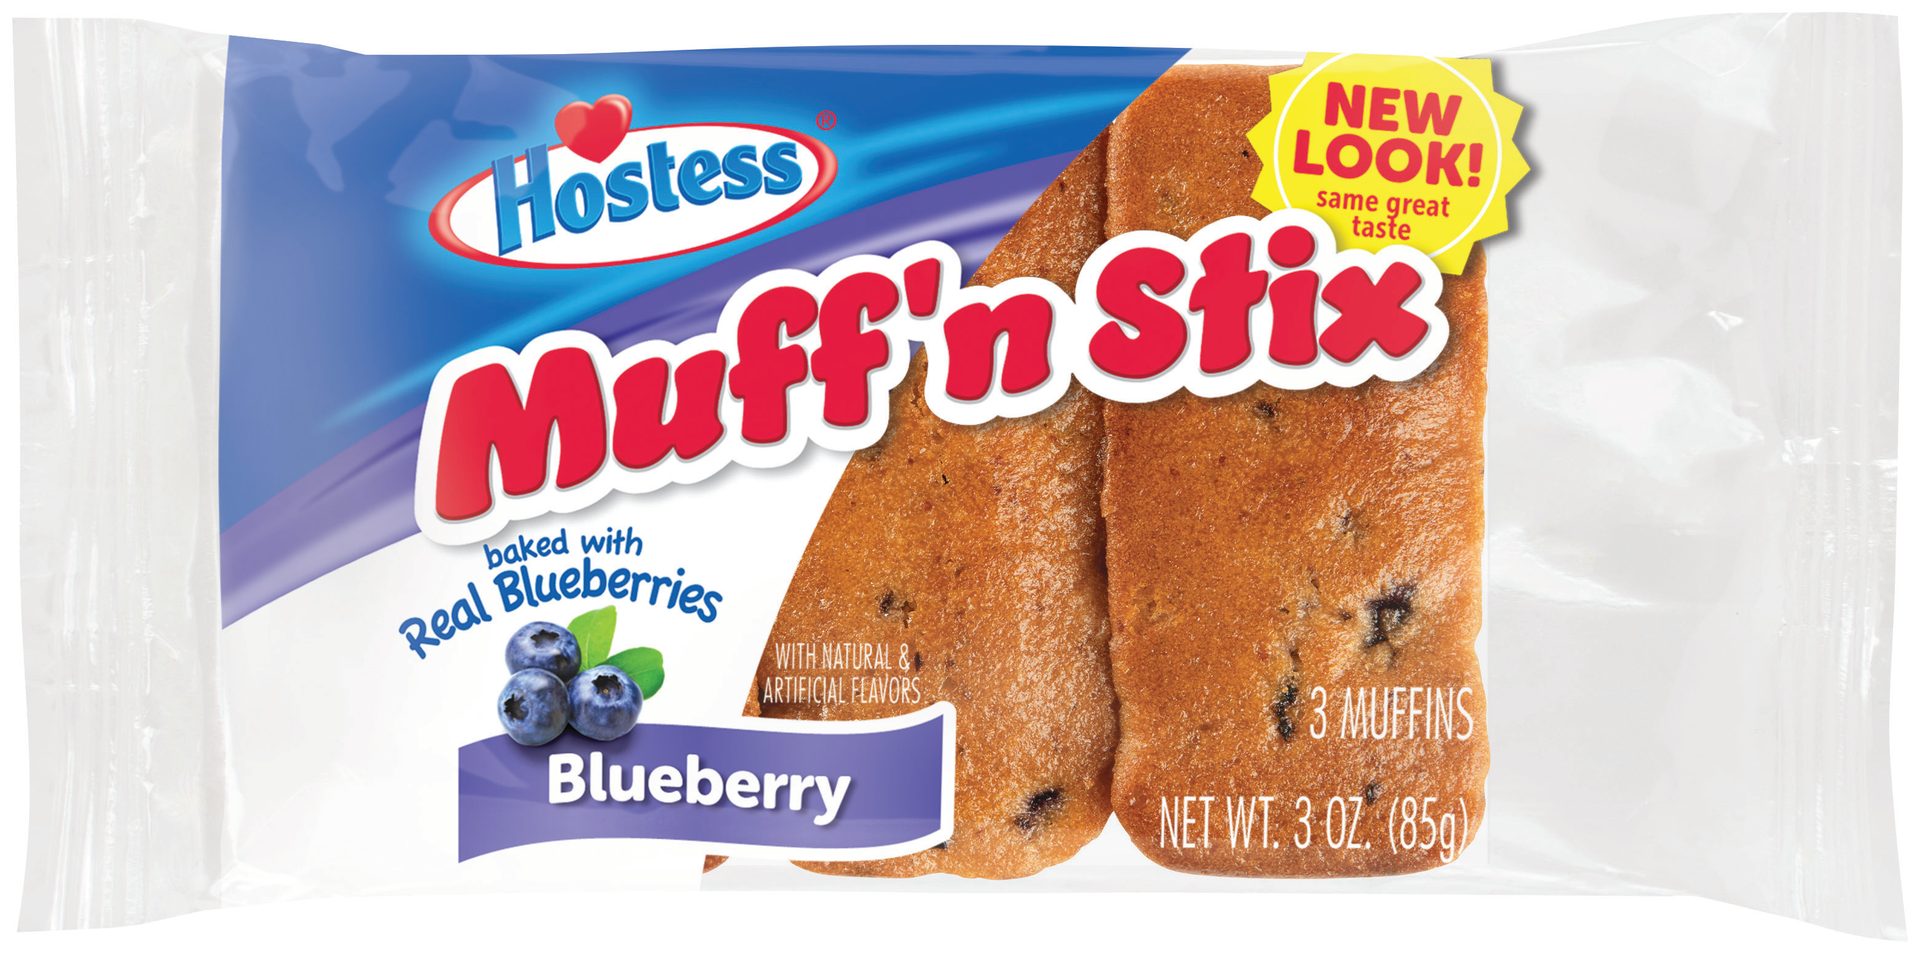 Snack cakes, Packaging, Box, Logo, Text, Font, Red, Blue, Blueberries